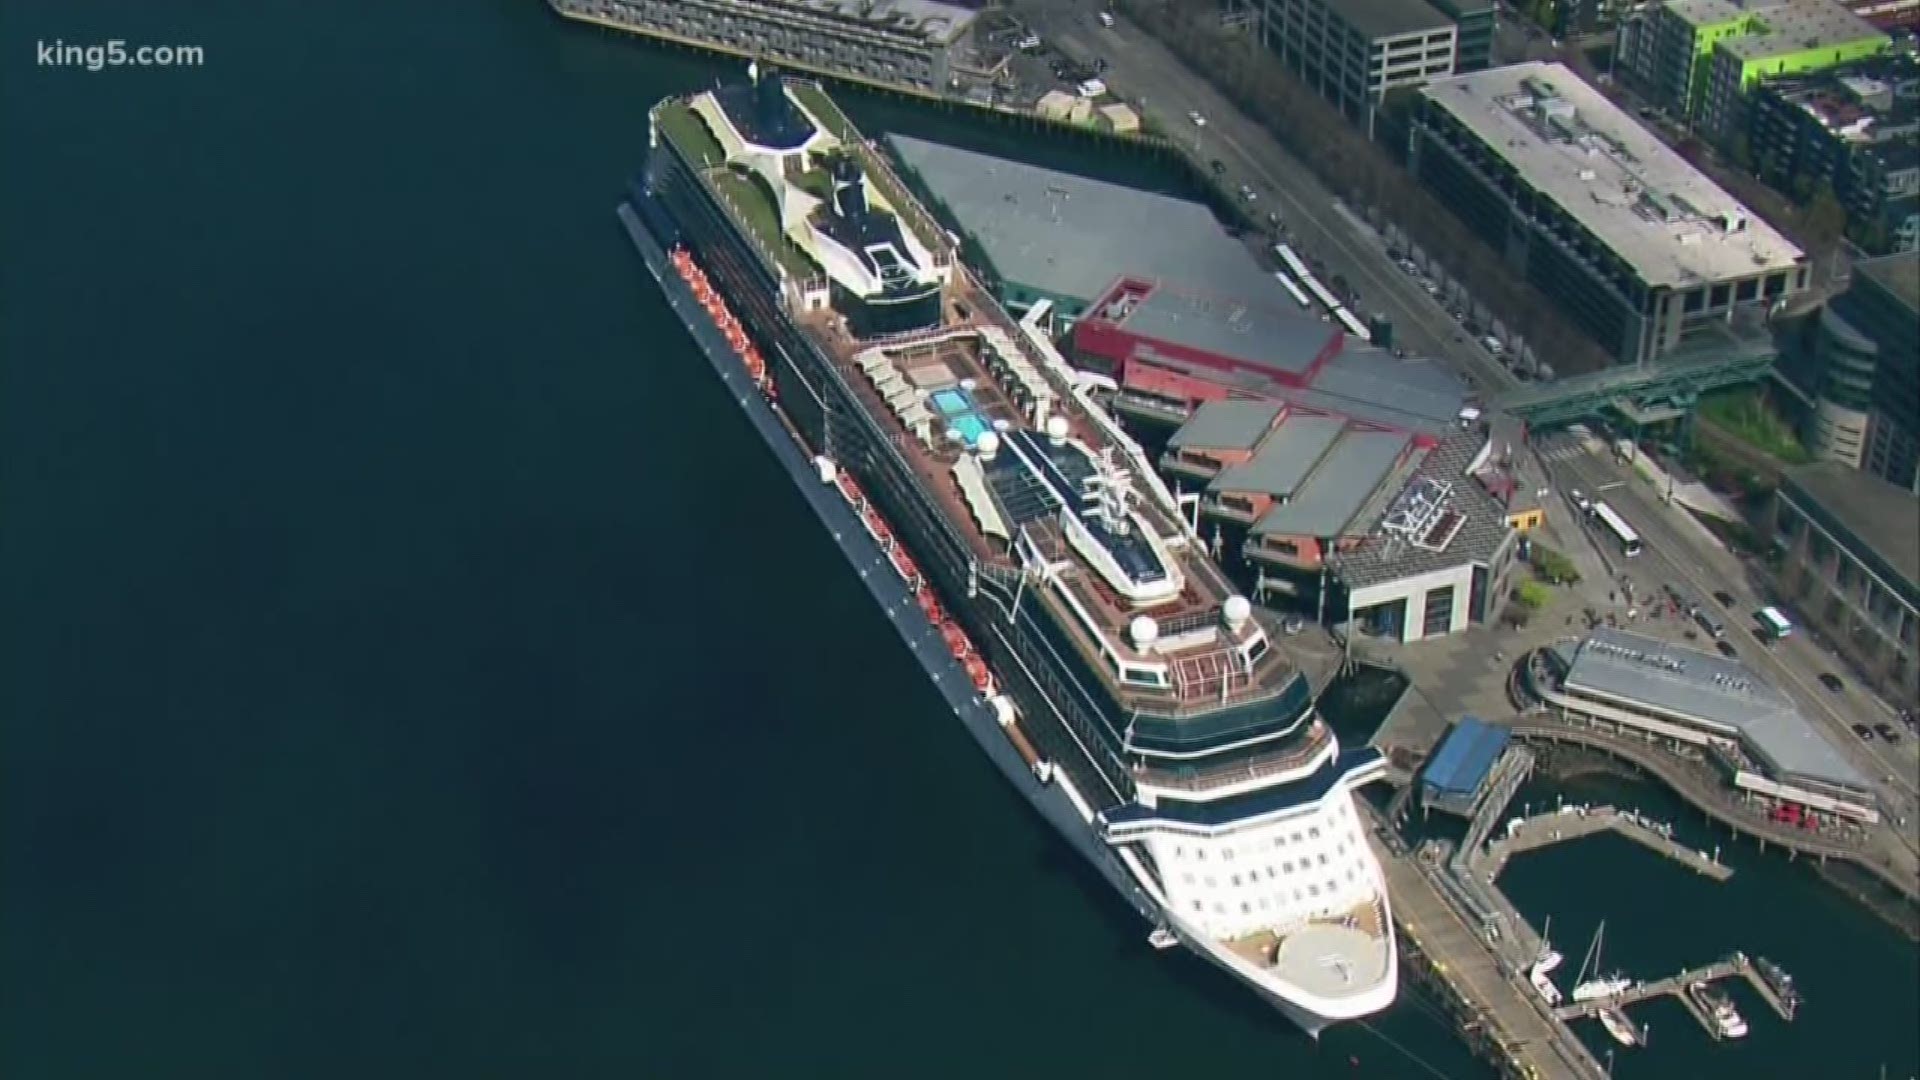 The first cruise ship arrived at the Port of Seattle for this season. This year the port is expecting a record number of visitors. KING 5's Kalie Greenberg explains what this means for the waterfront.